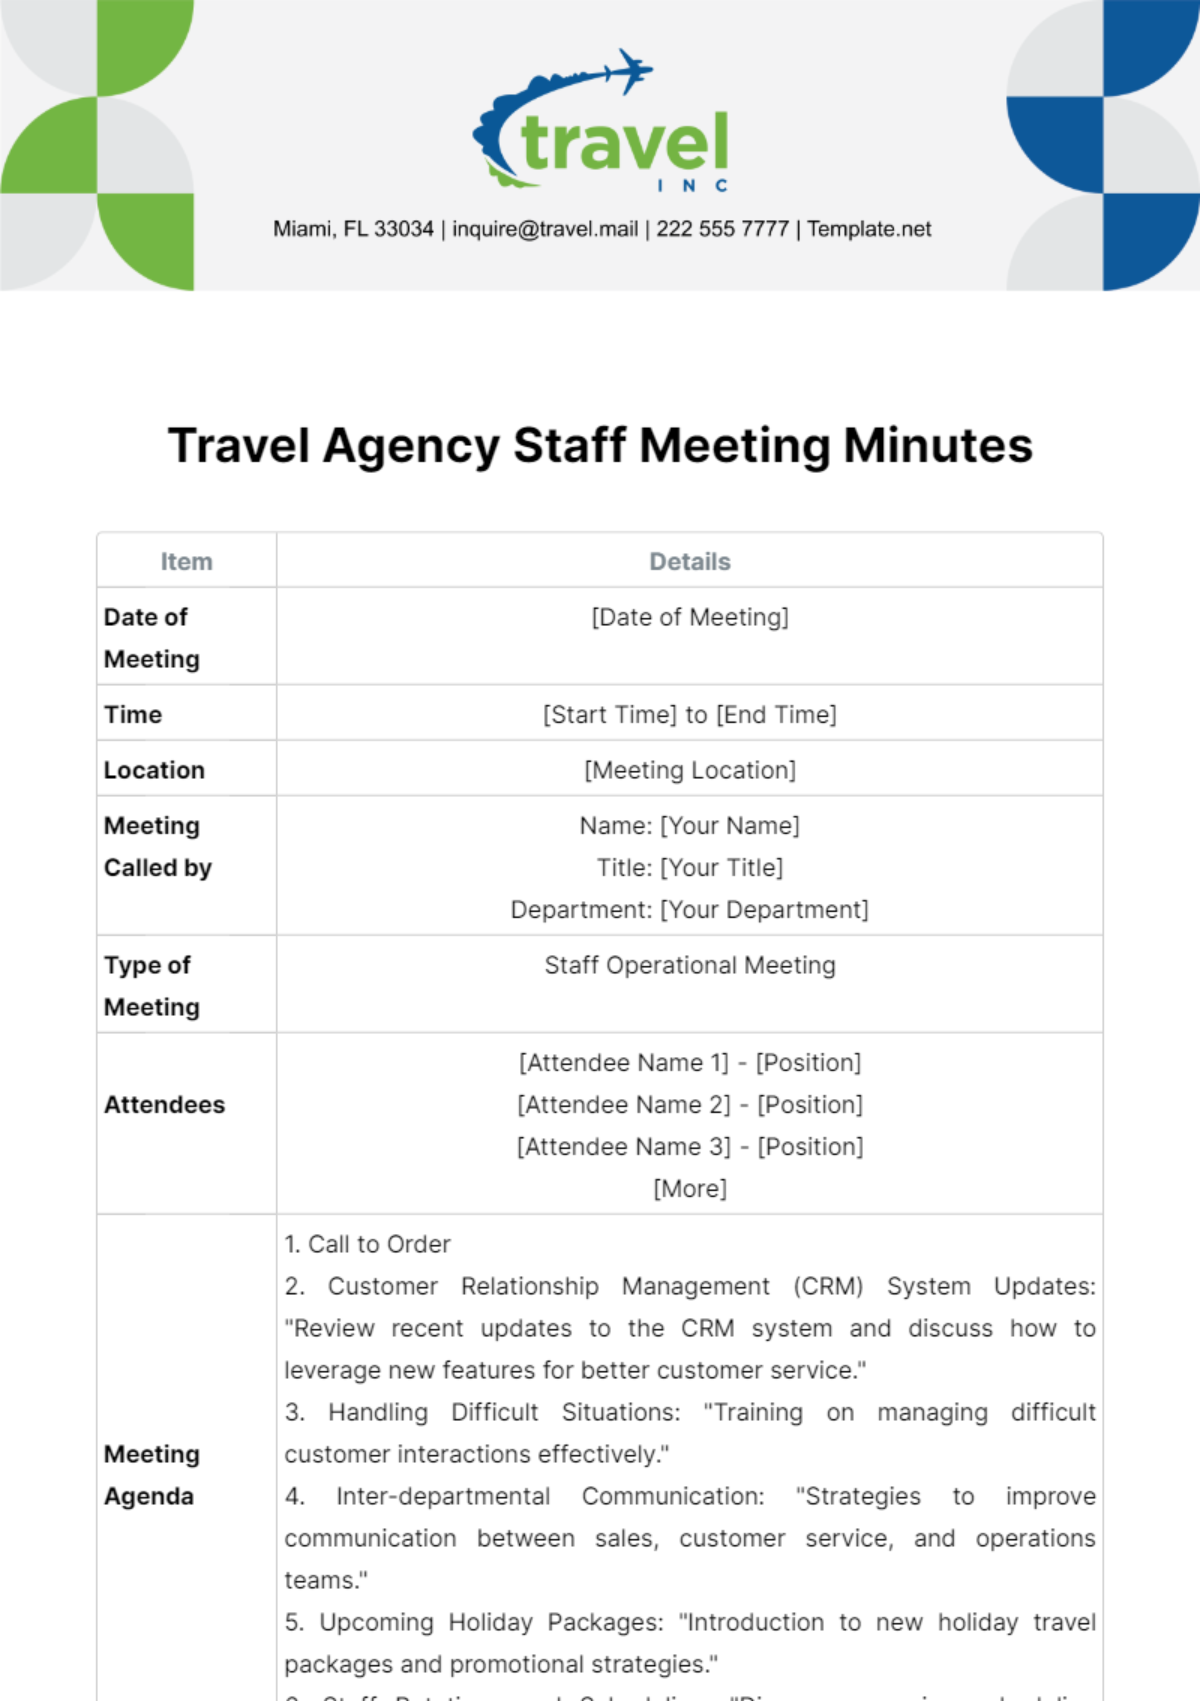 Travel Agency Staff Meeting Minutes Template